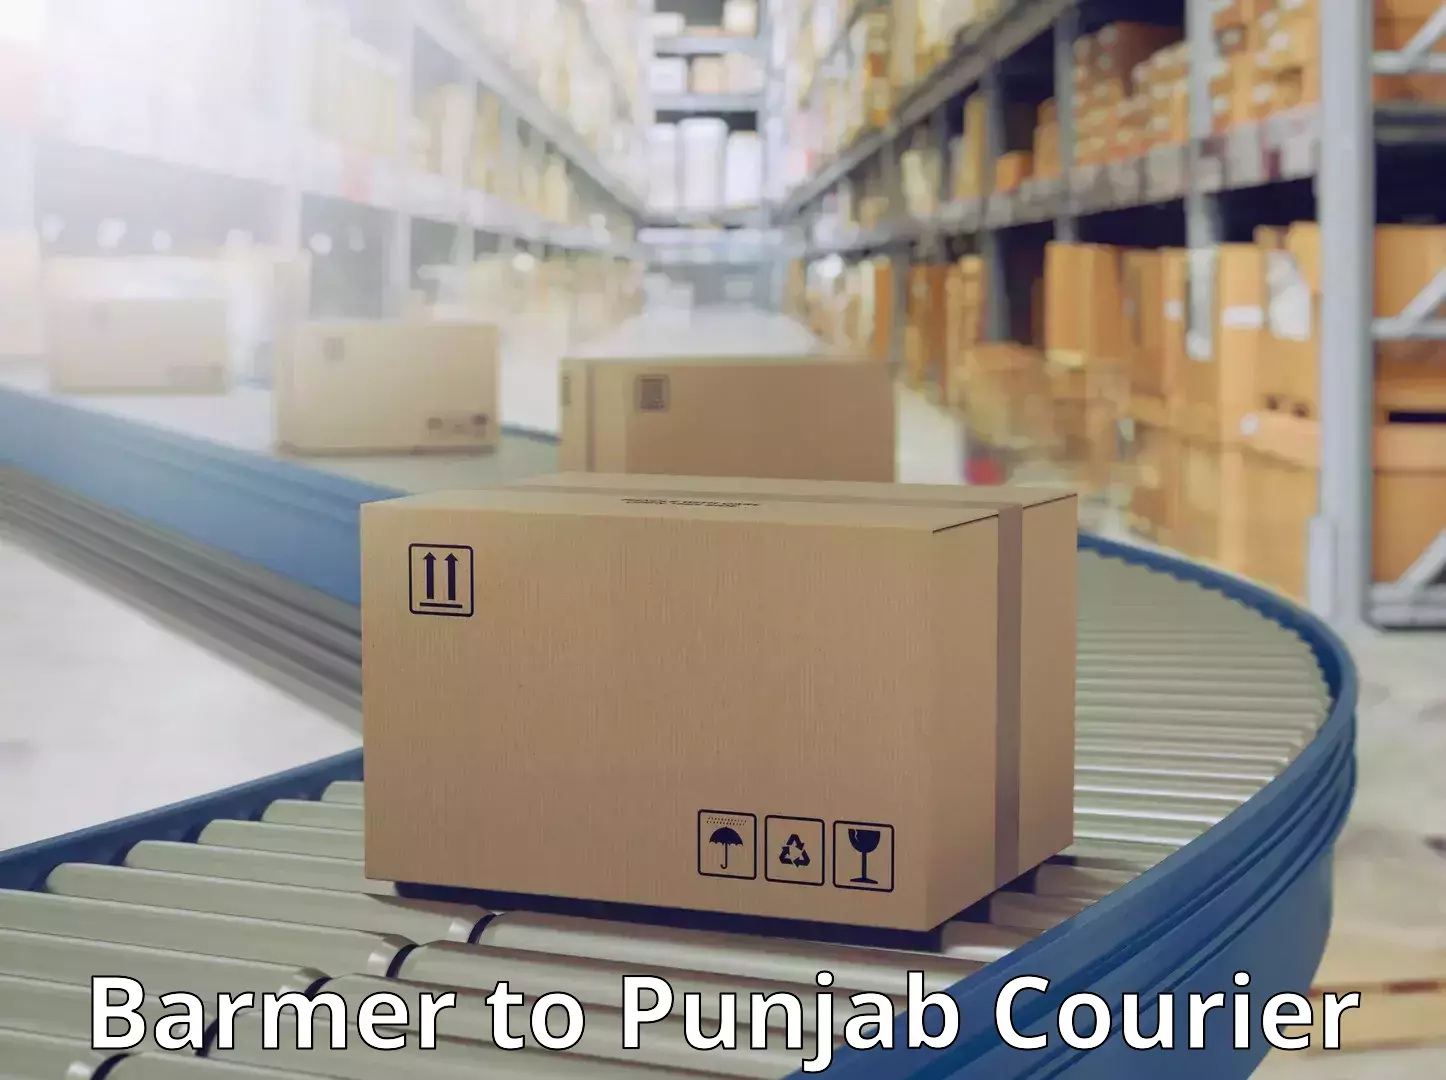 Advanced parcel tracking in Barmer to Amritsar